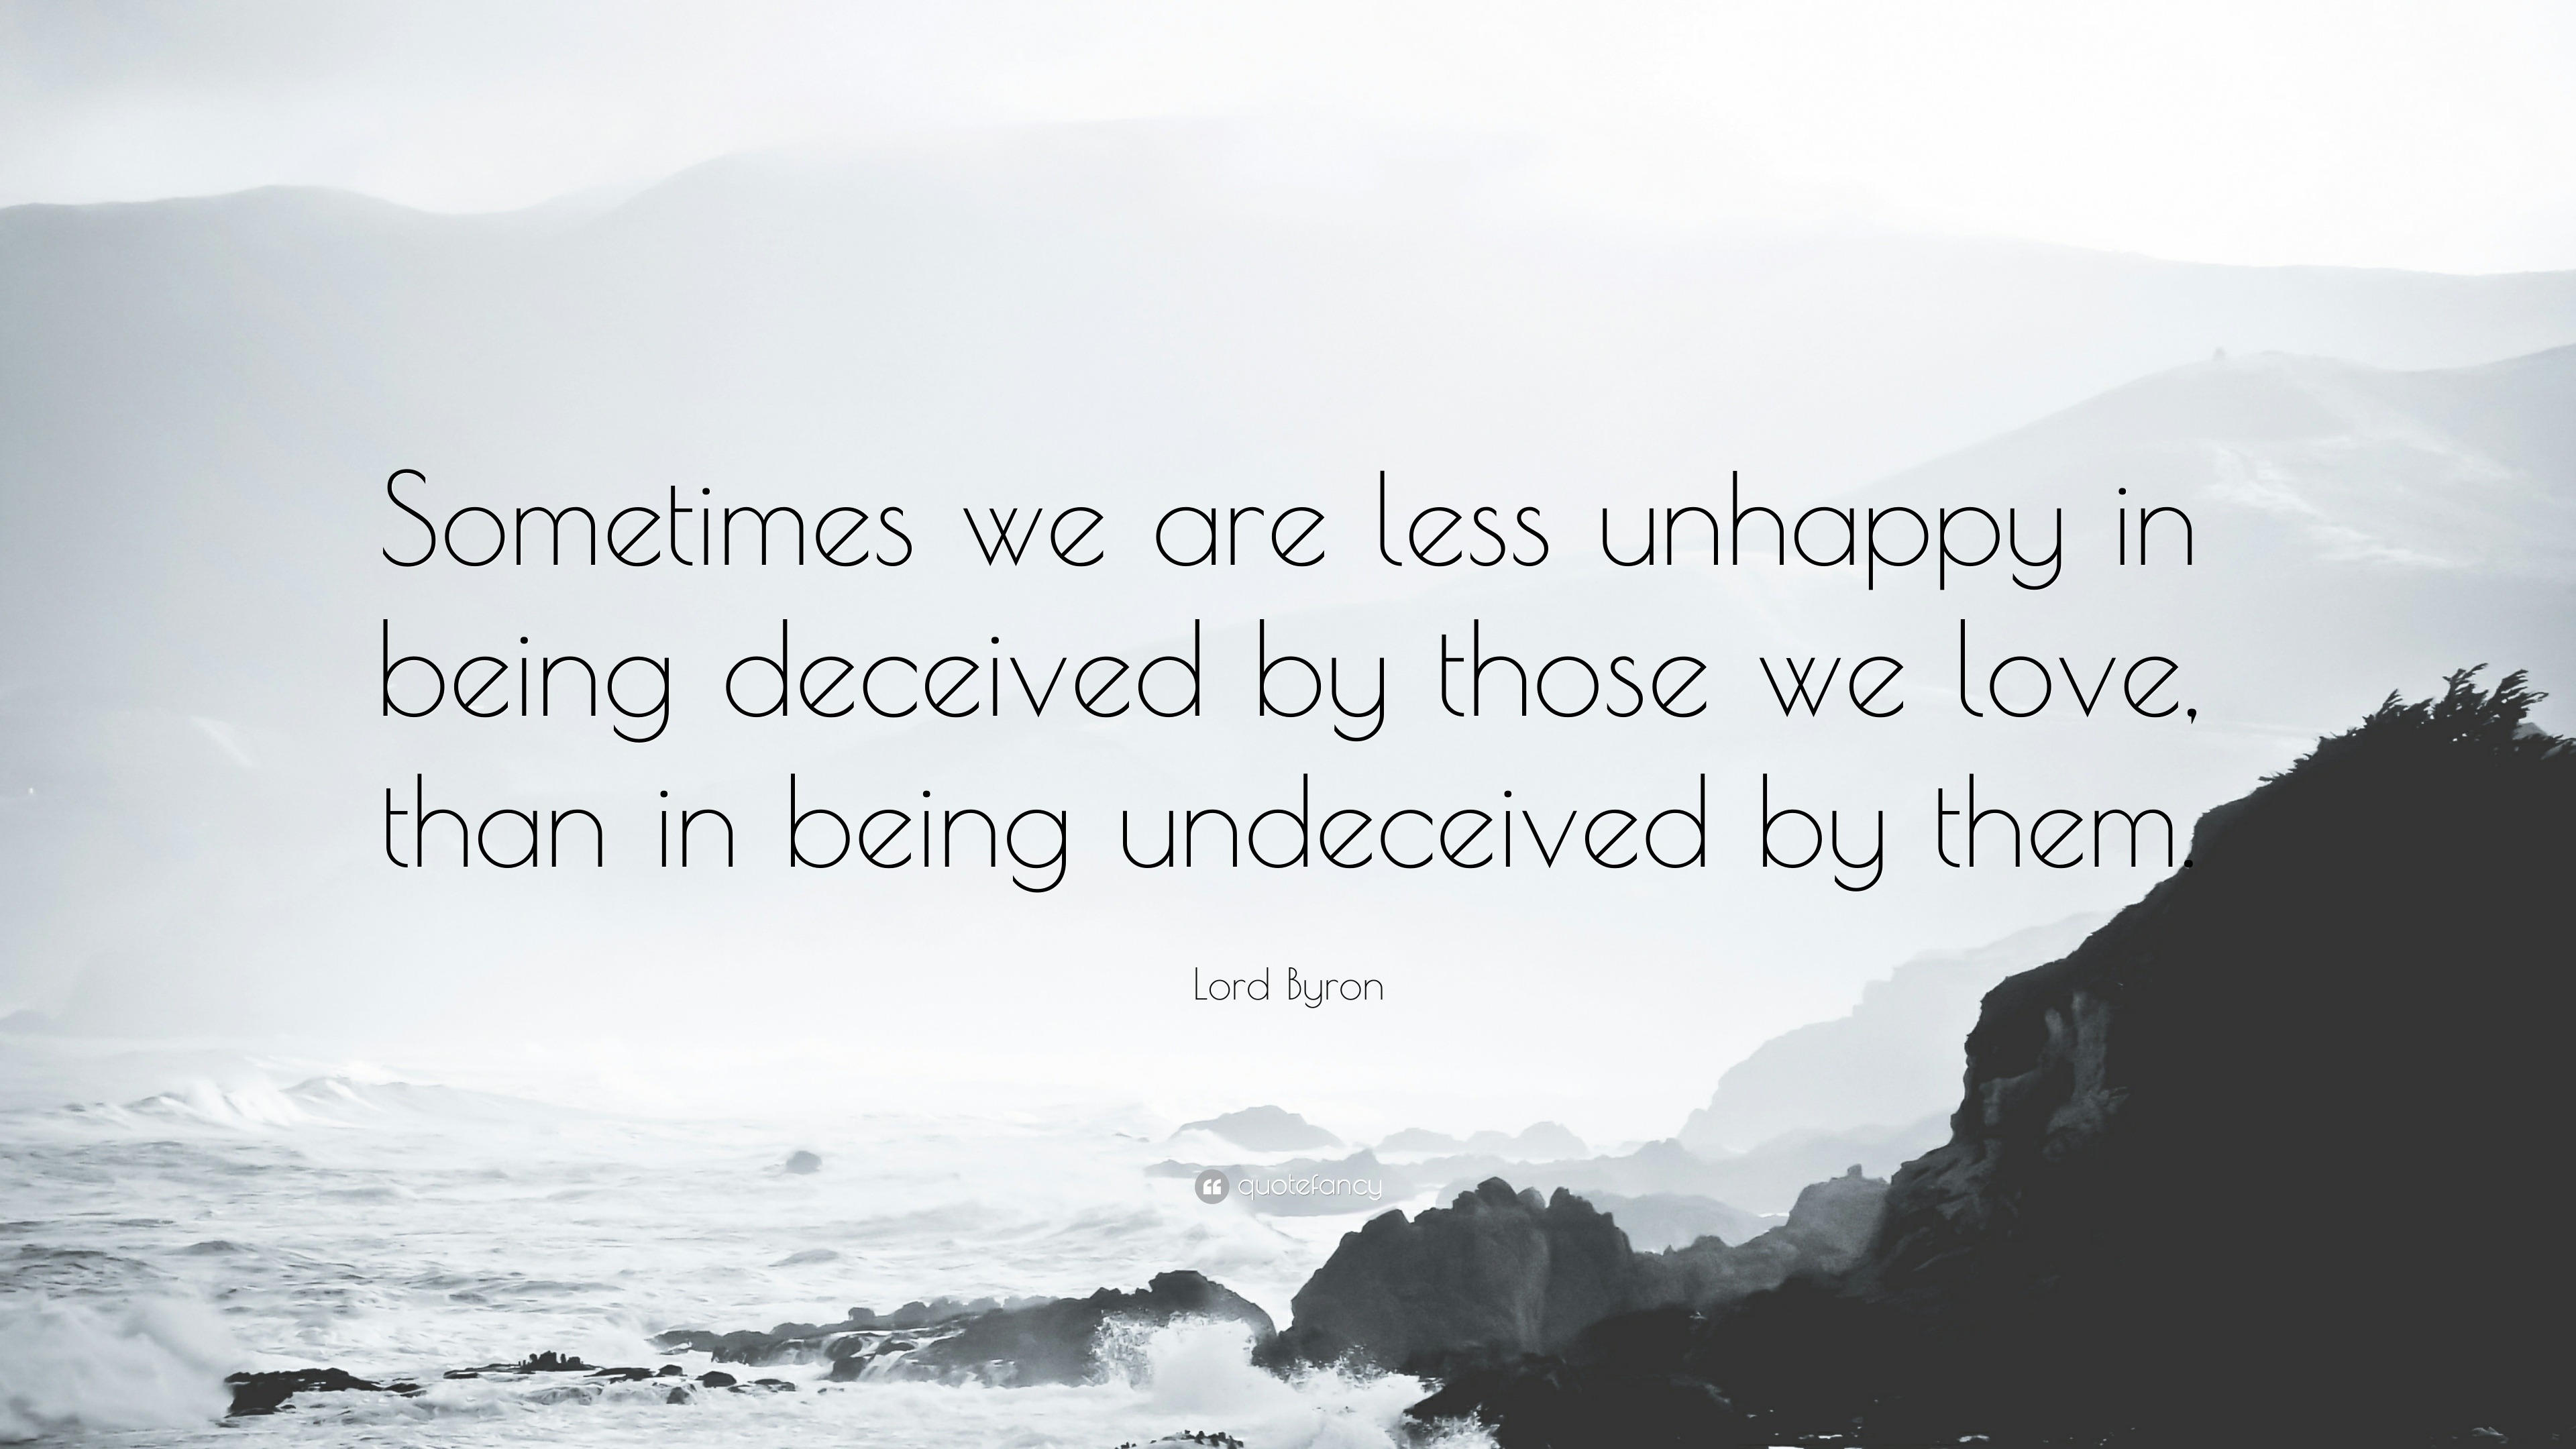 Lord Byron Quote: “Sometimes we are less unhappy in being deceived by ...